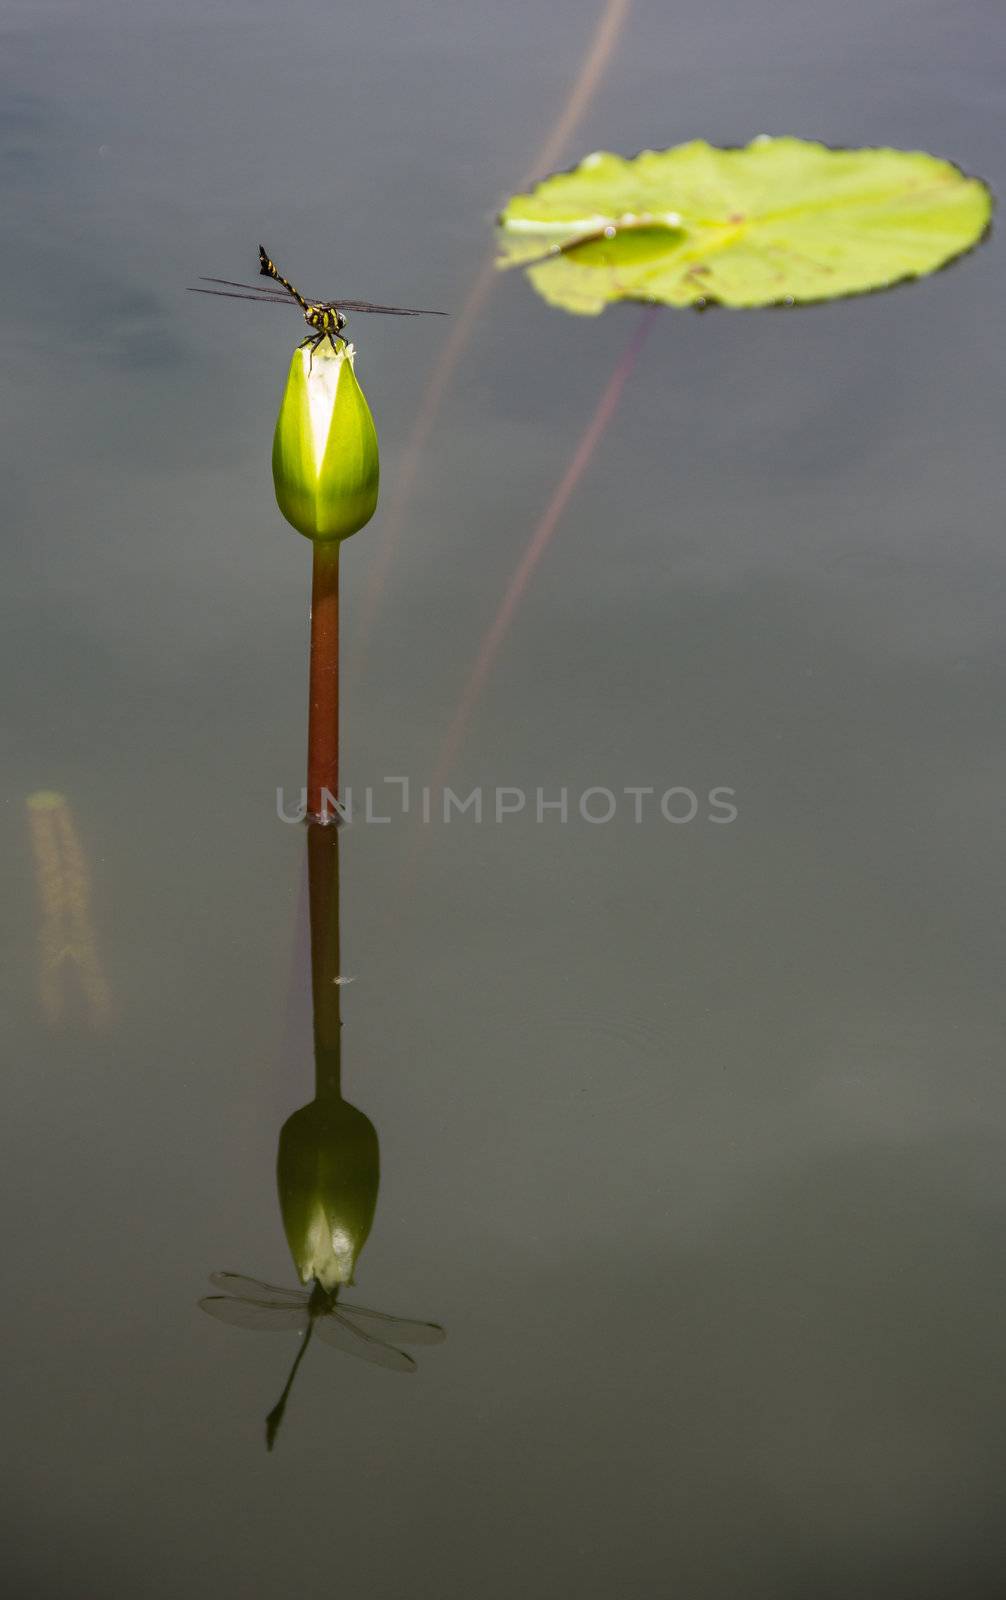 Dragonfly on young water lily by punpleng